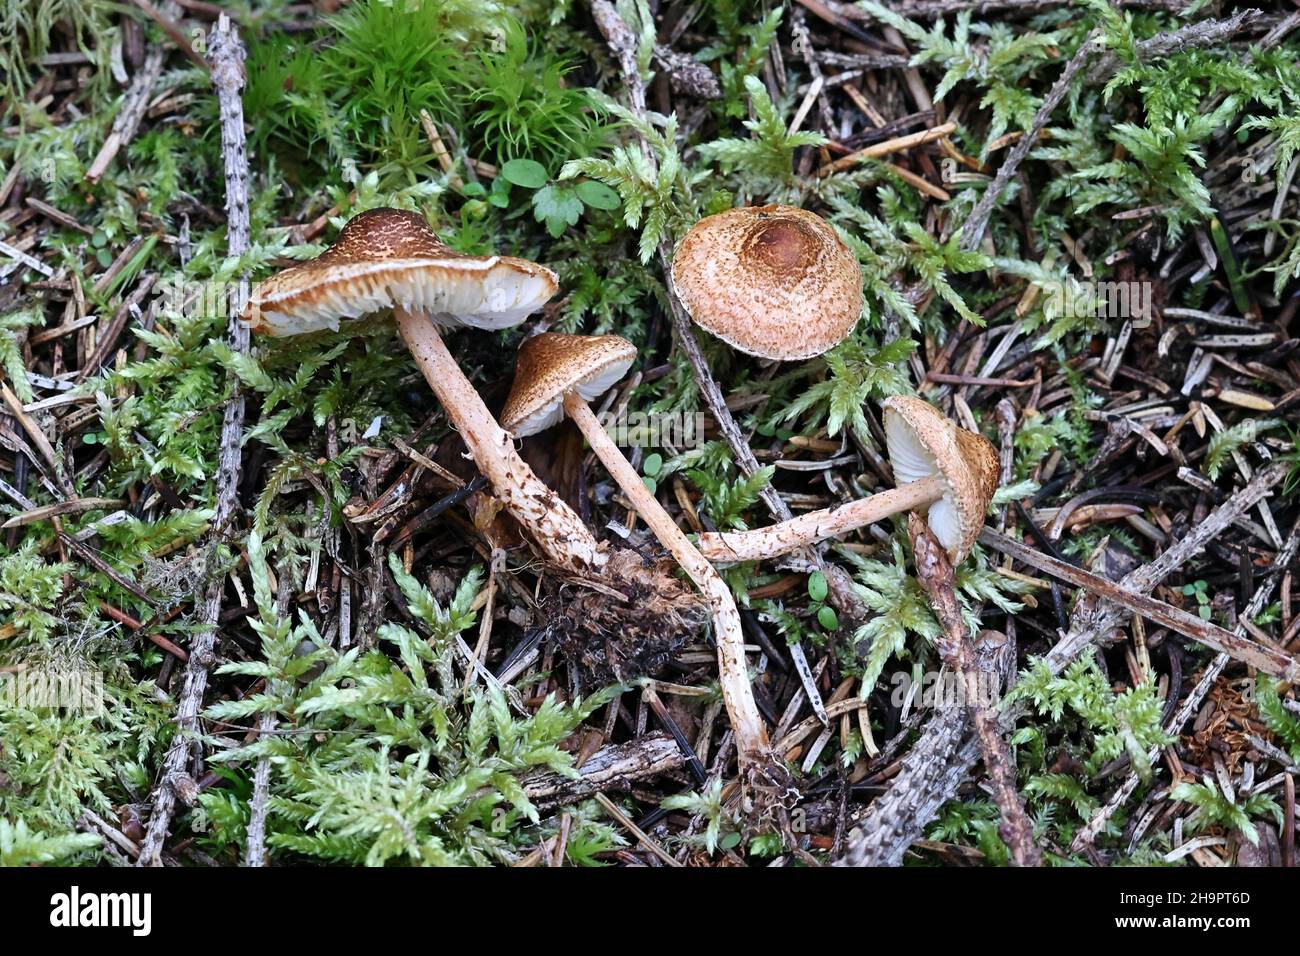 Lepiota castanea, commonly known as the chestnut dapperling, wild poisonous mushroom from Finland Stock Photo